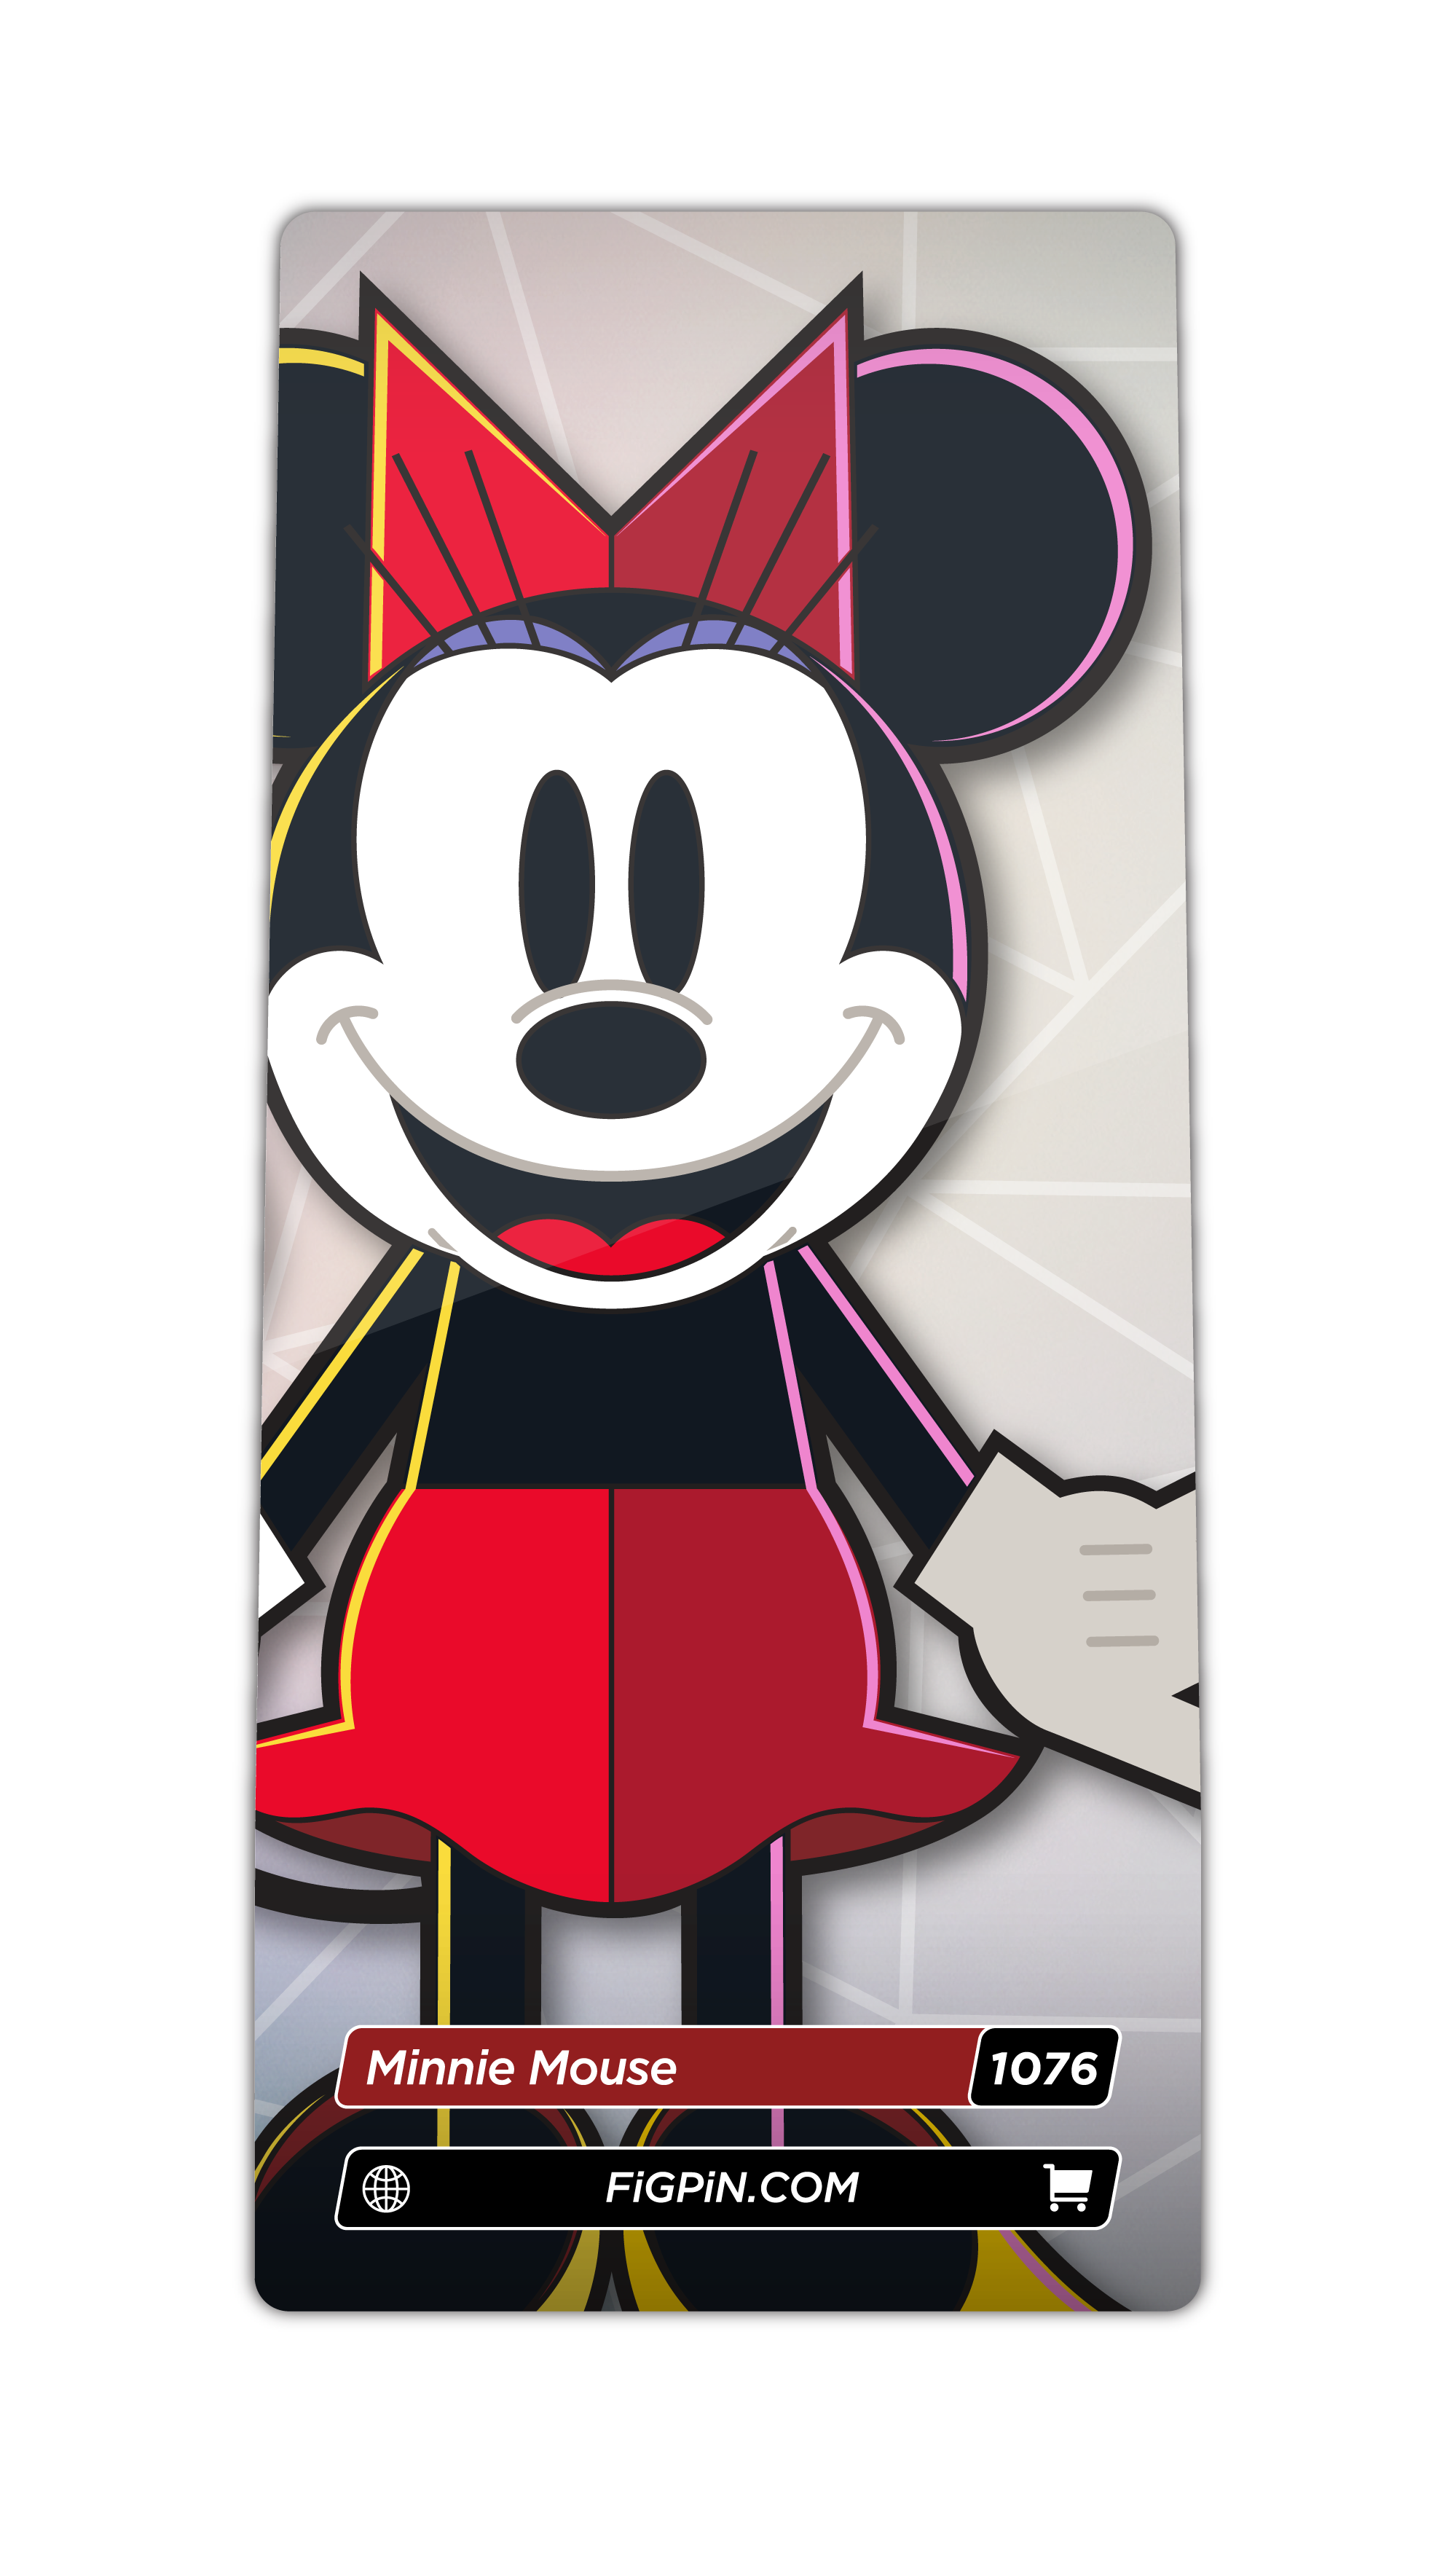 Minnie Mouse (1076)